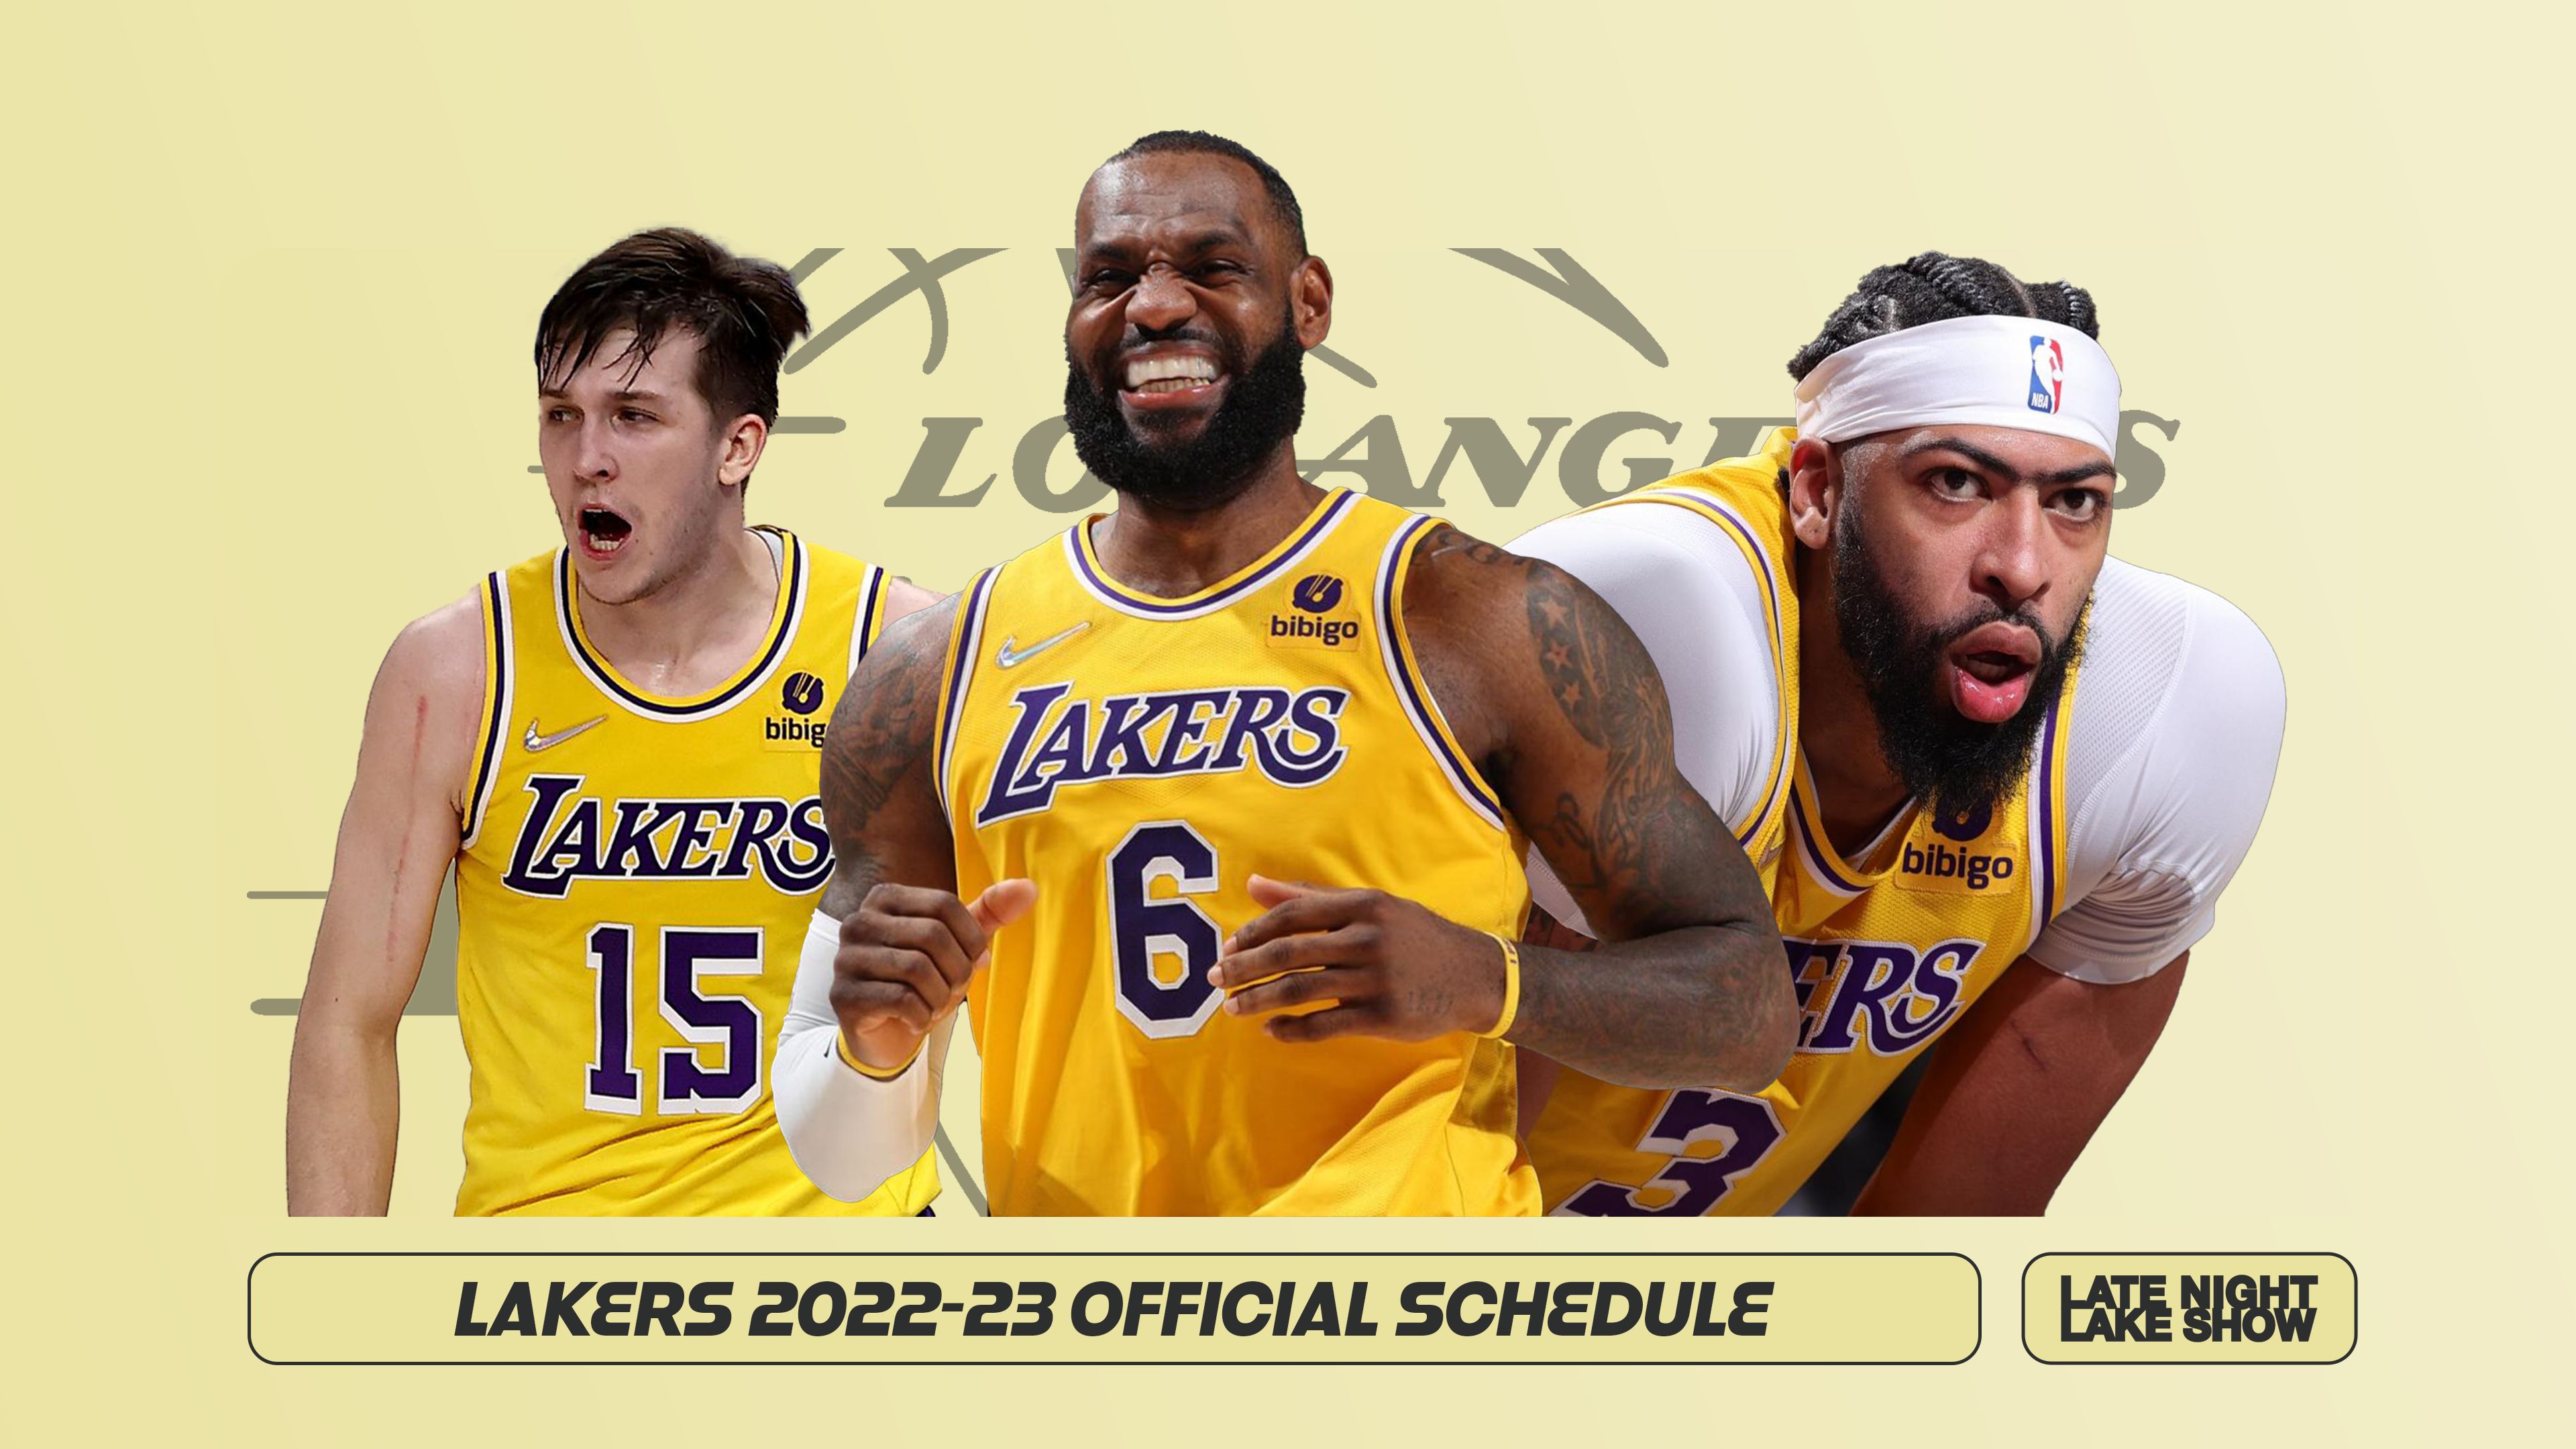 Must Watch Games On The 2022 2023 Laker Calendar Night Lake Show